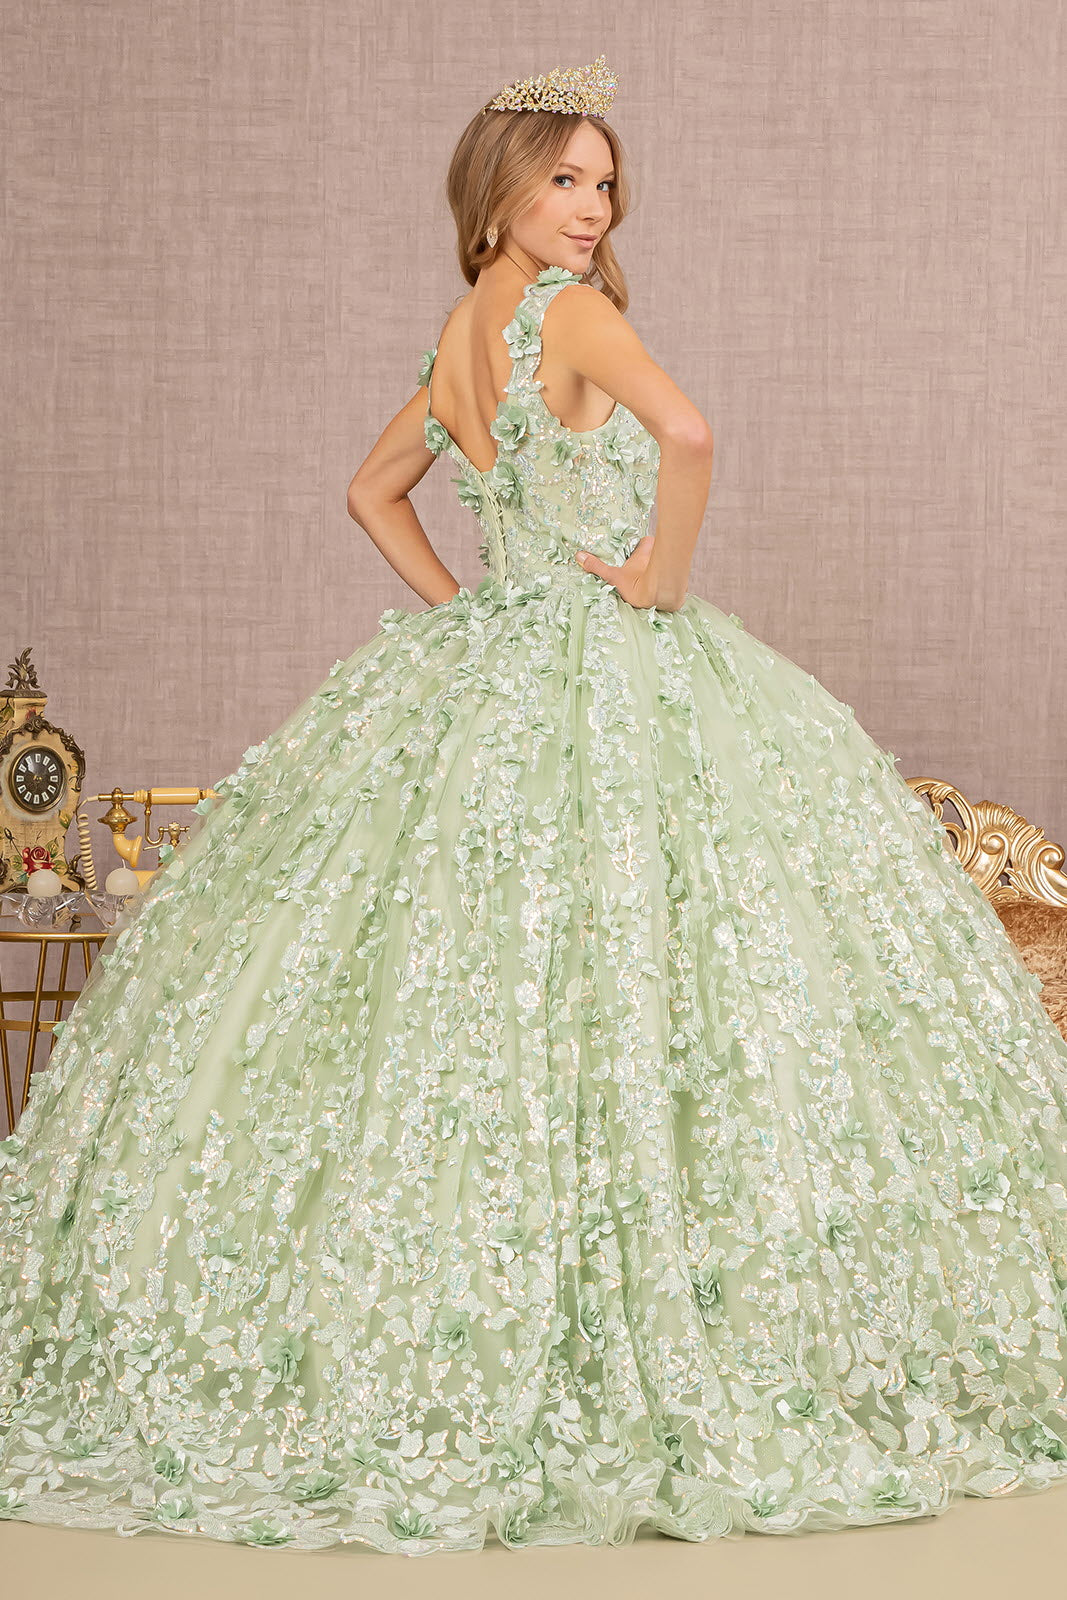 Jewel Embroidery 3-D Flower Mesh Ball Gown-smcdress